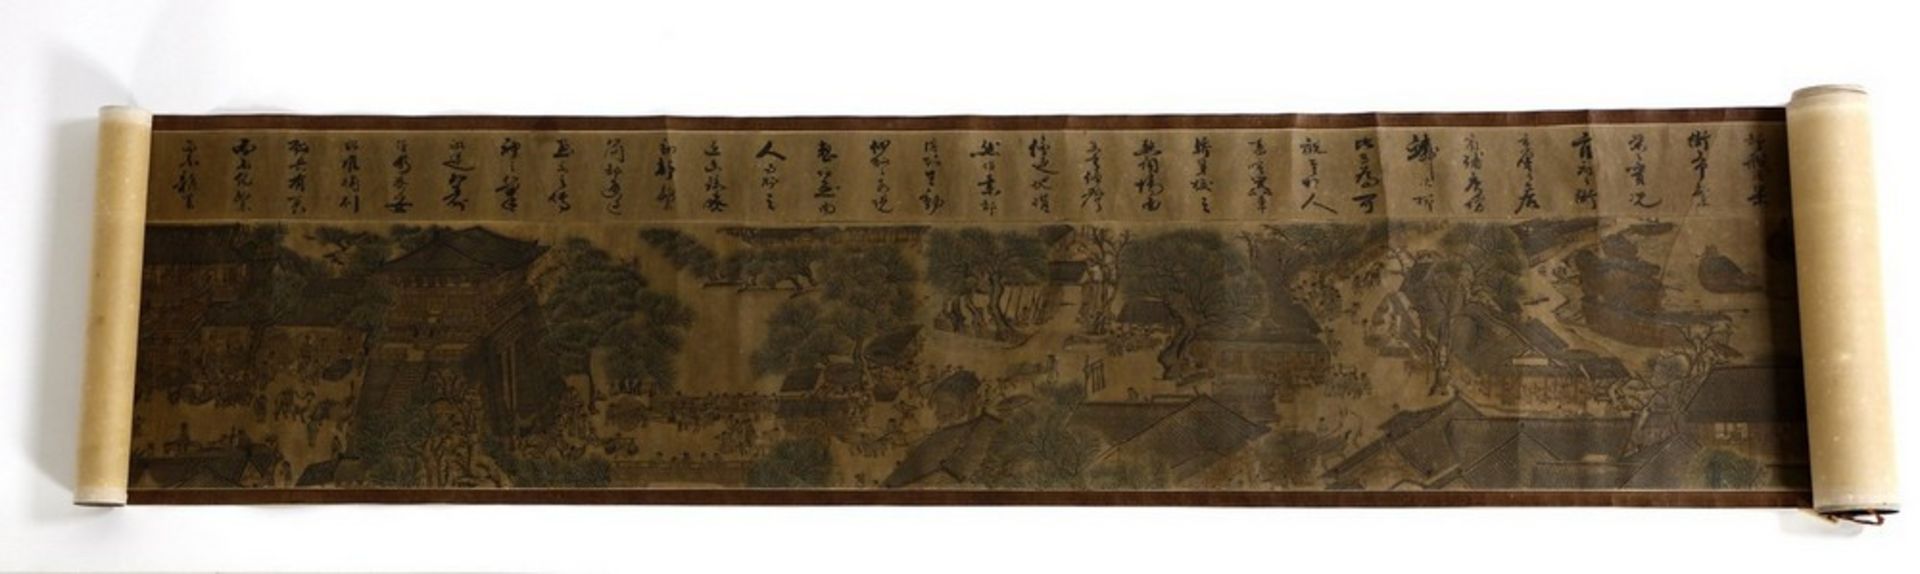 Arte Cinese A very long scroll on paper with a copy of Zhang Zeduan famous painting China, 20th cen - Image 6 of 11